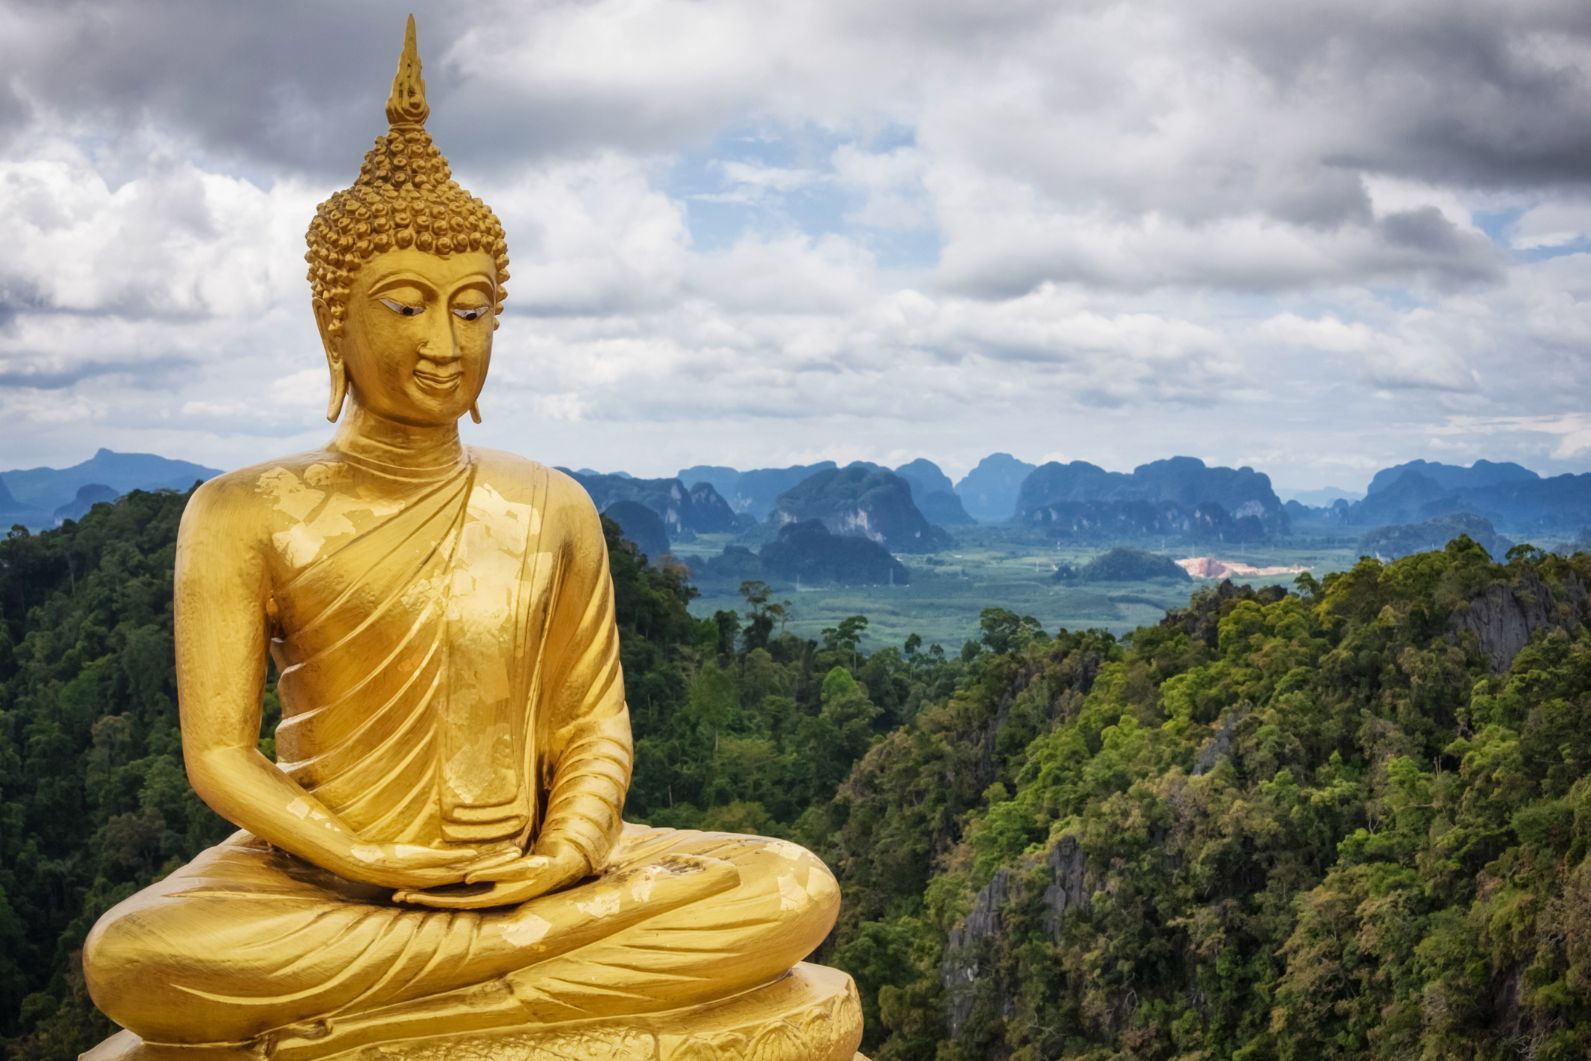 The enormous Buddha at the Tiger Cave Temple, backdropped by Krabi and the Kiriwong Valley